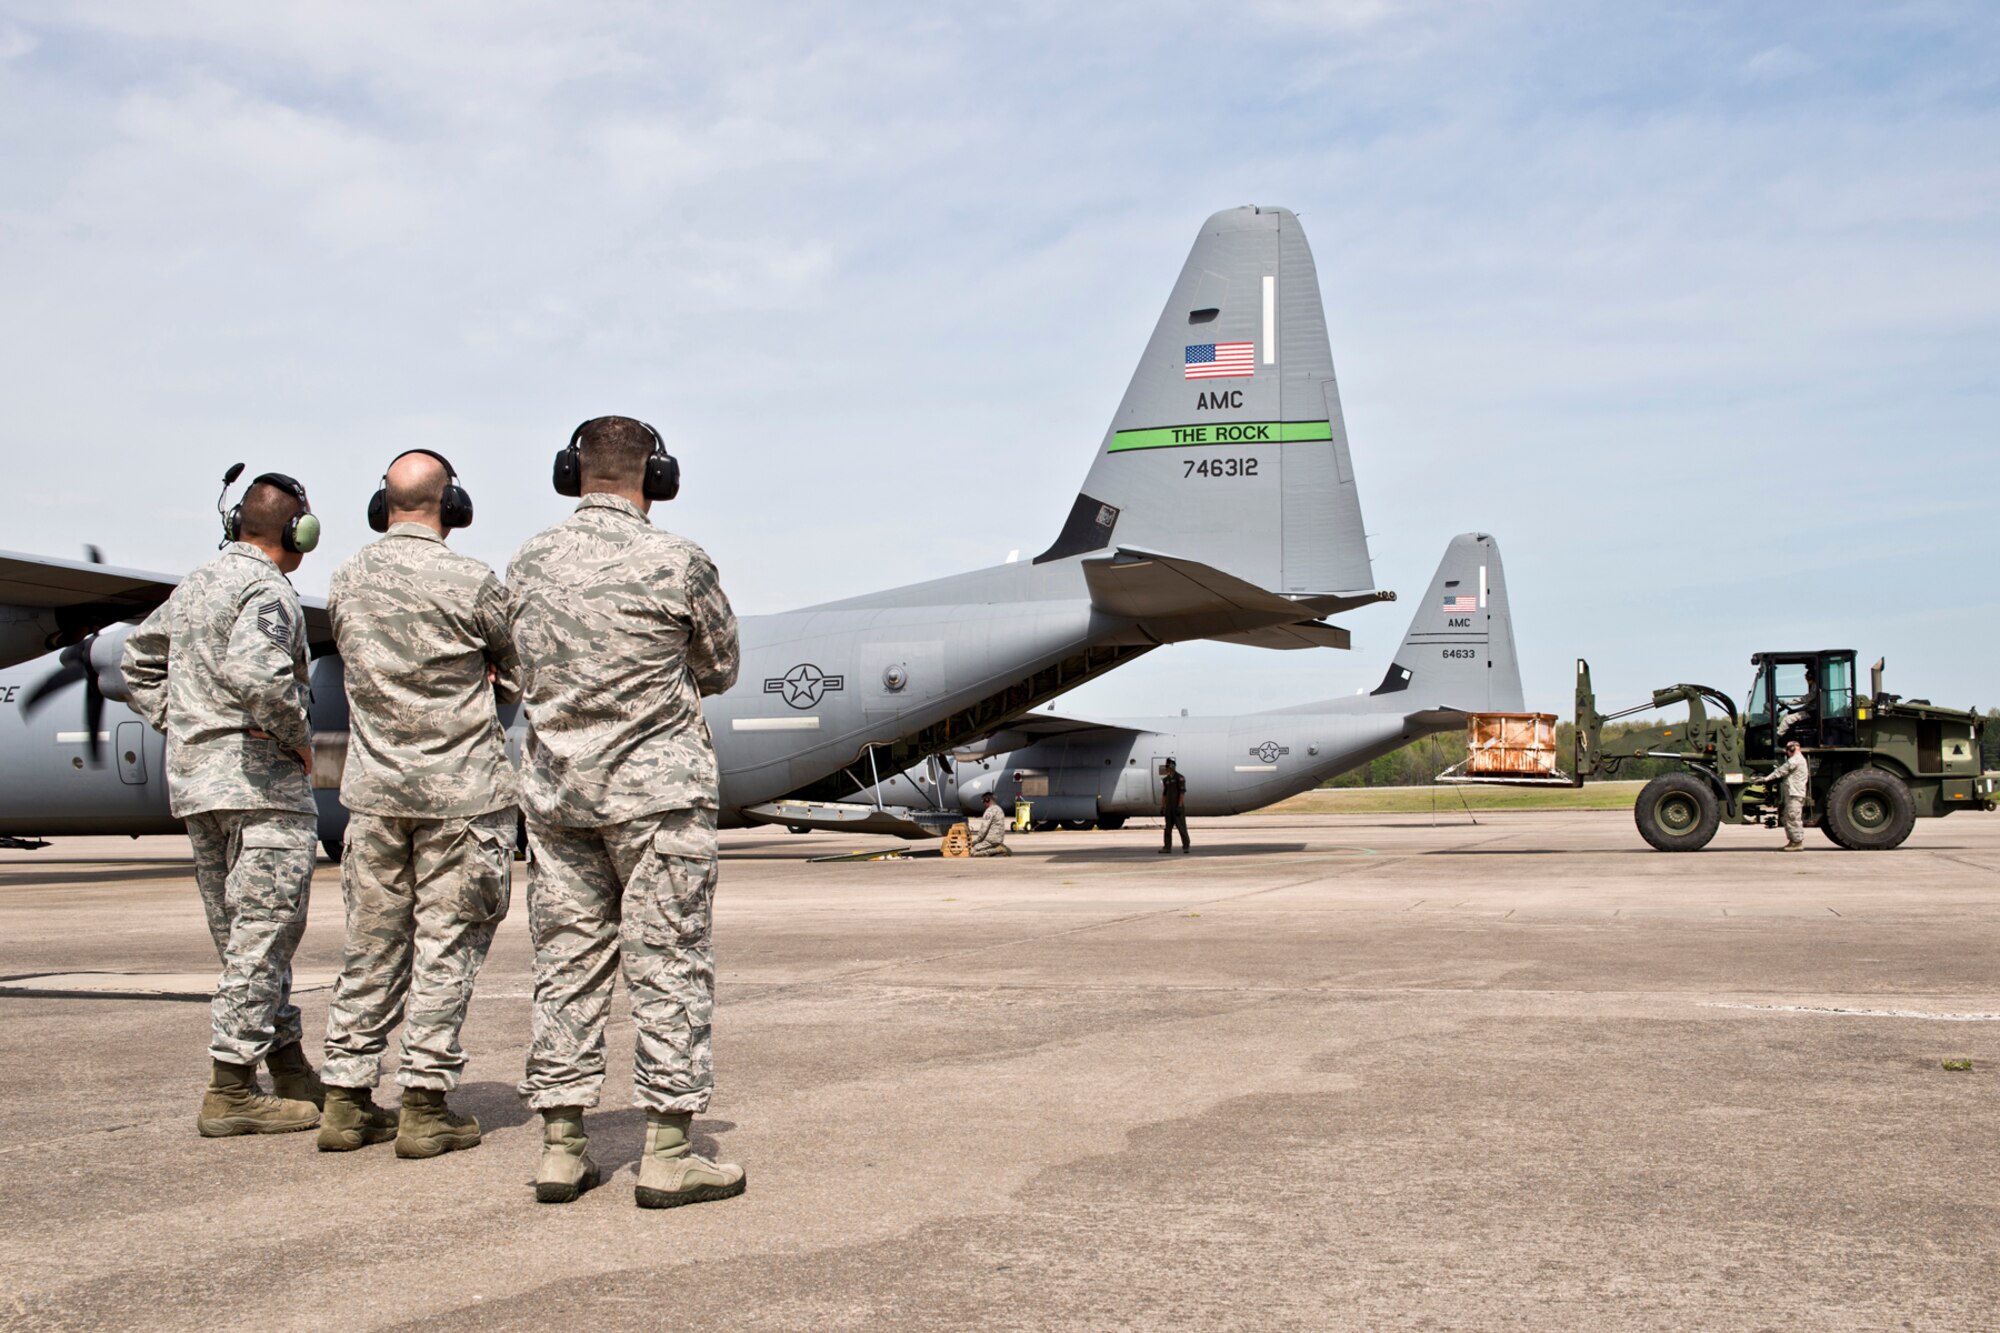 Members of the 913th Maintenance Squadron’s senior leadership look on as a team from the 96th Aerial Port Squadron practices an Engines Running On-Load/Odd-Load (ERO) of a C-130J Super Hercules during the Unit Training Assembly (UTA) weekend April 2, 2017, at Little Rock Air Force Base, Ark. The team will be competing in this year’s Port Dawg Challenge at Dobbins Air Reserve Base, Ga. (U.S. Air Force photo by Master Sgt. Jeff Walston/Released)